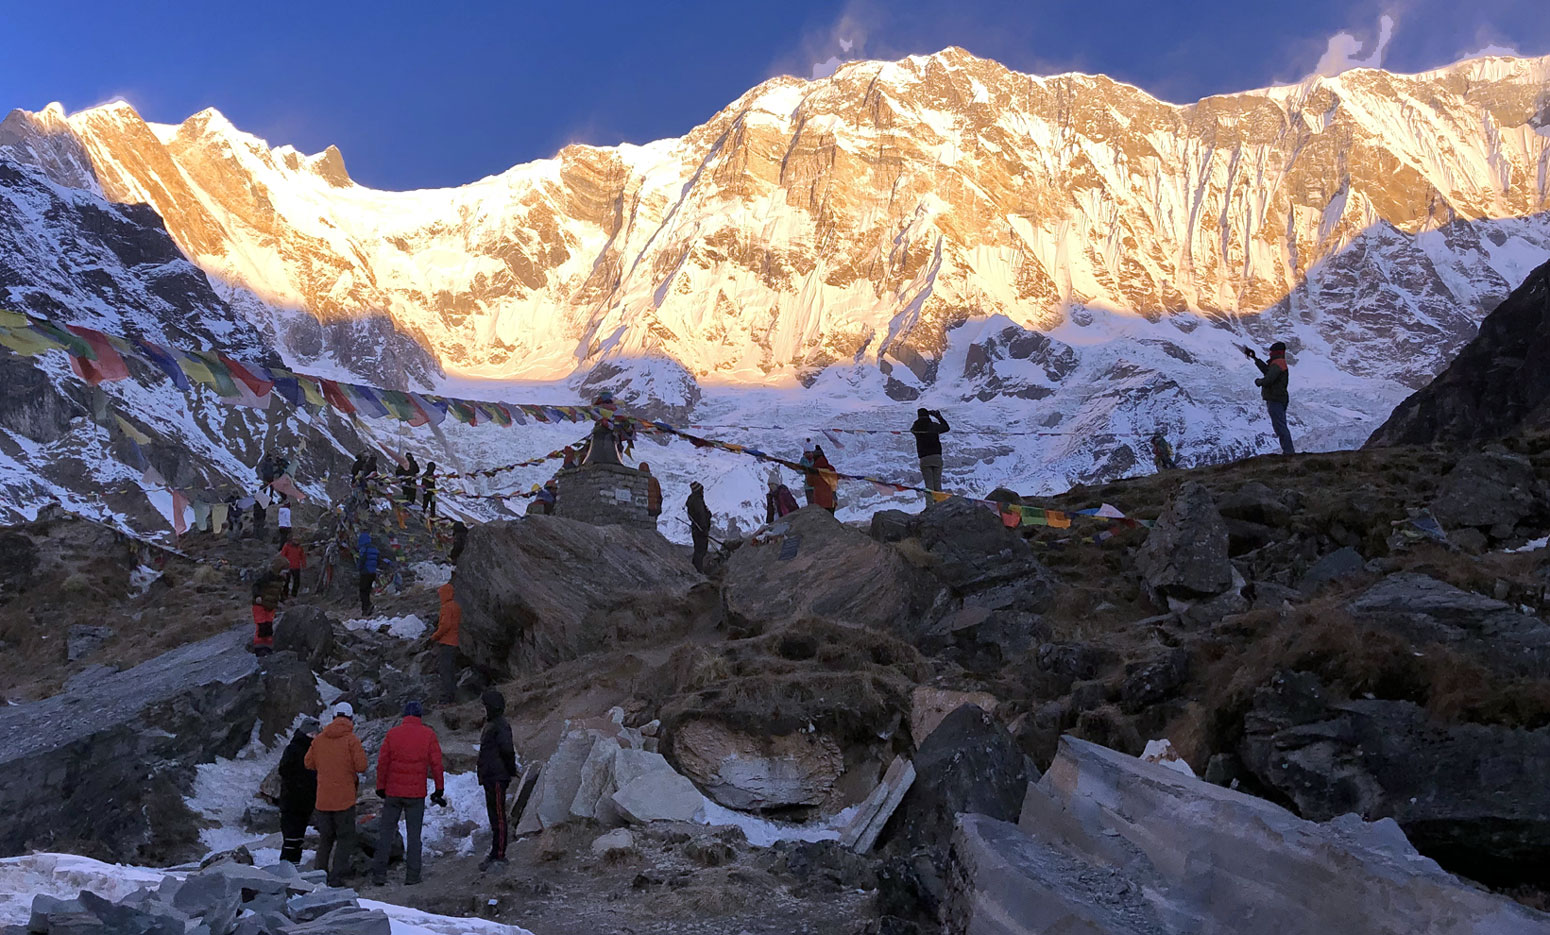 incredible view of Annapurna massif from base camp